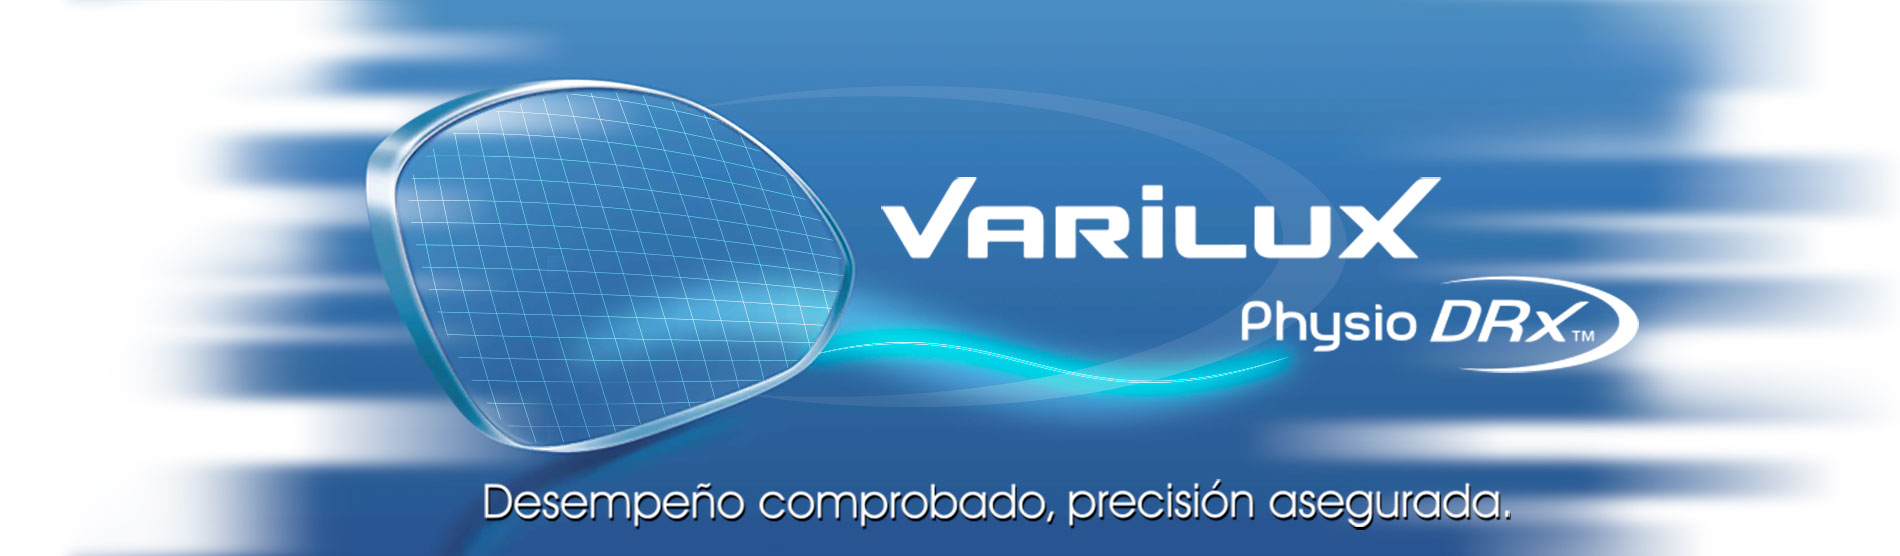 varilux physio DRX